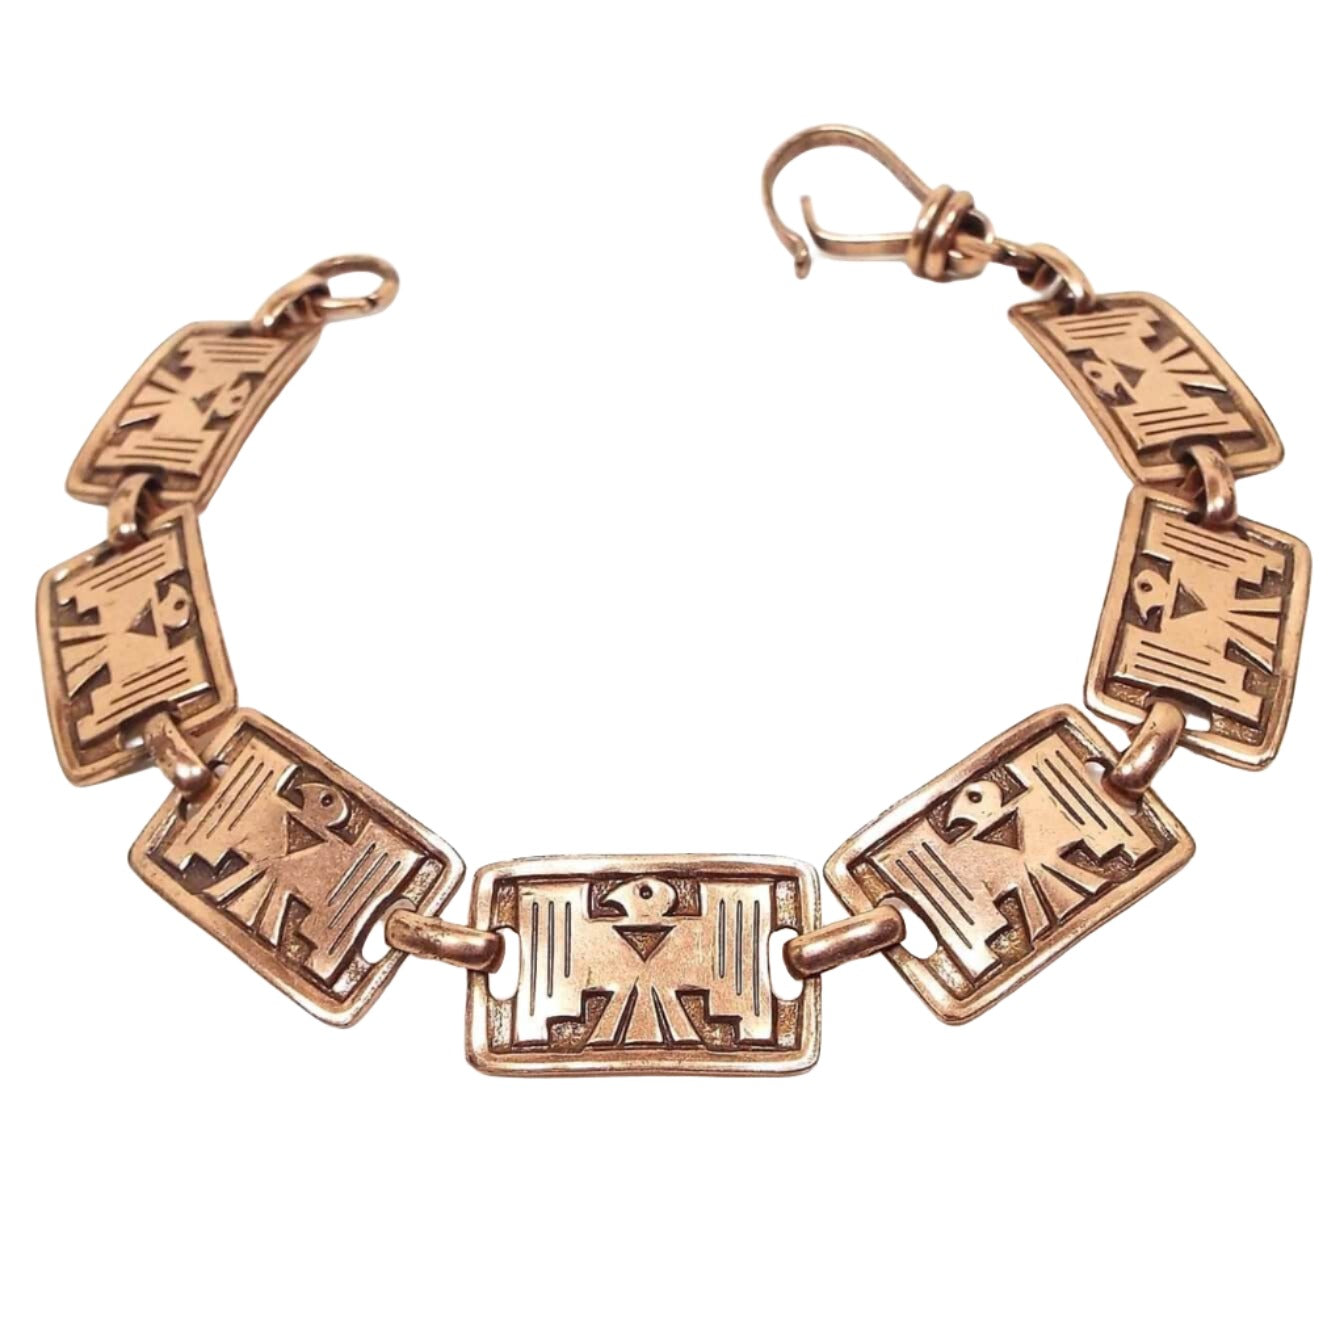 Top view of the retro vintage Sunbell Trading Post panel bracelet. It is copper in color with rectangle links. Each link has a Thunderbird symbol on it. There is a hinged clip clasp at the end.